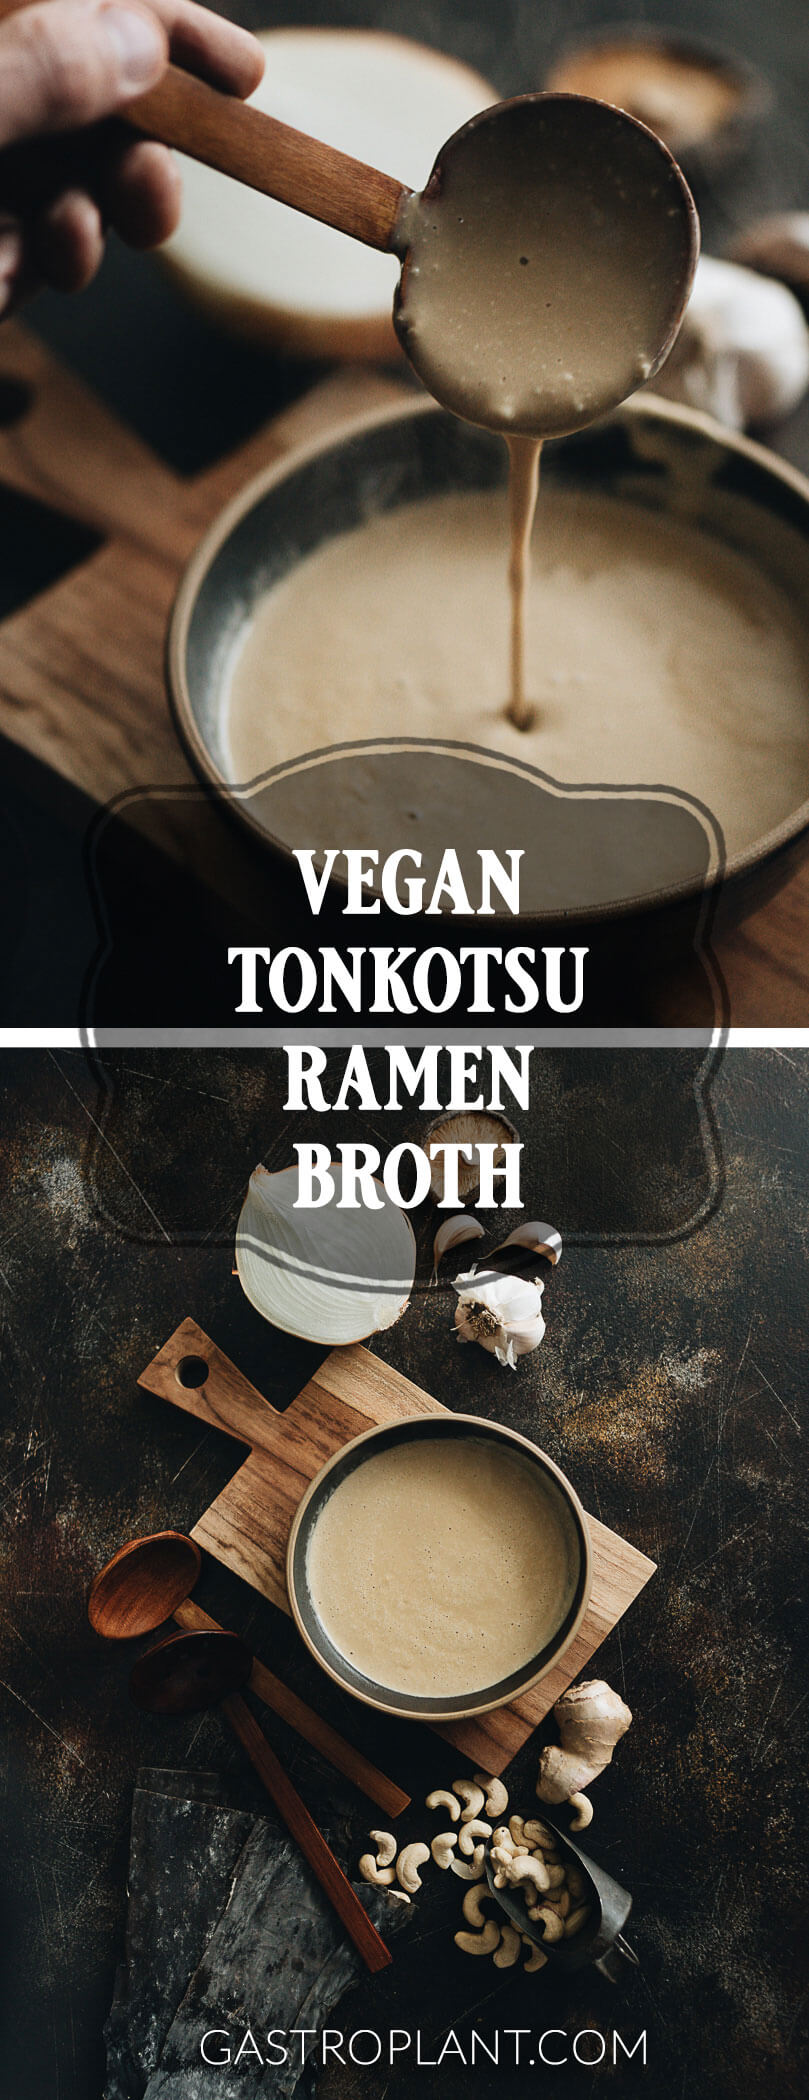 Vegan Tonkotsu Broth - This vegan ramen broth is as rich as any soup you’ve ever tasted. It’s intensely creamy, savory, and nutty. It clings closely to noodles, making your slurps most satisfying. A steaming hot pot of this goodness can be yours in just 30 minutes.